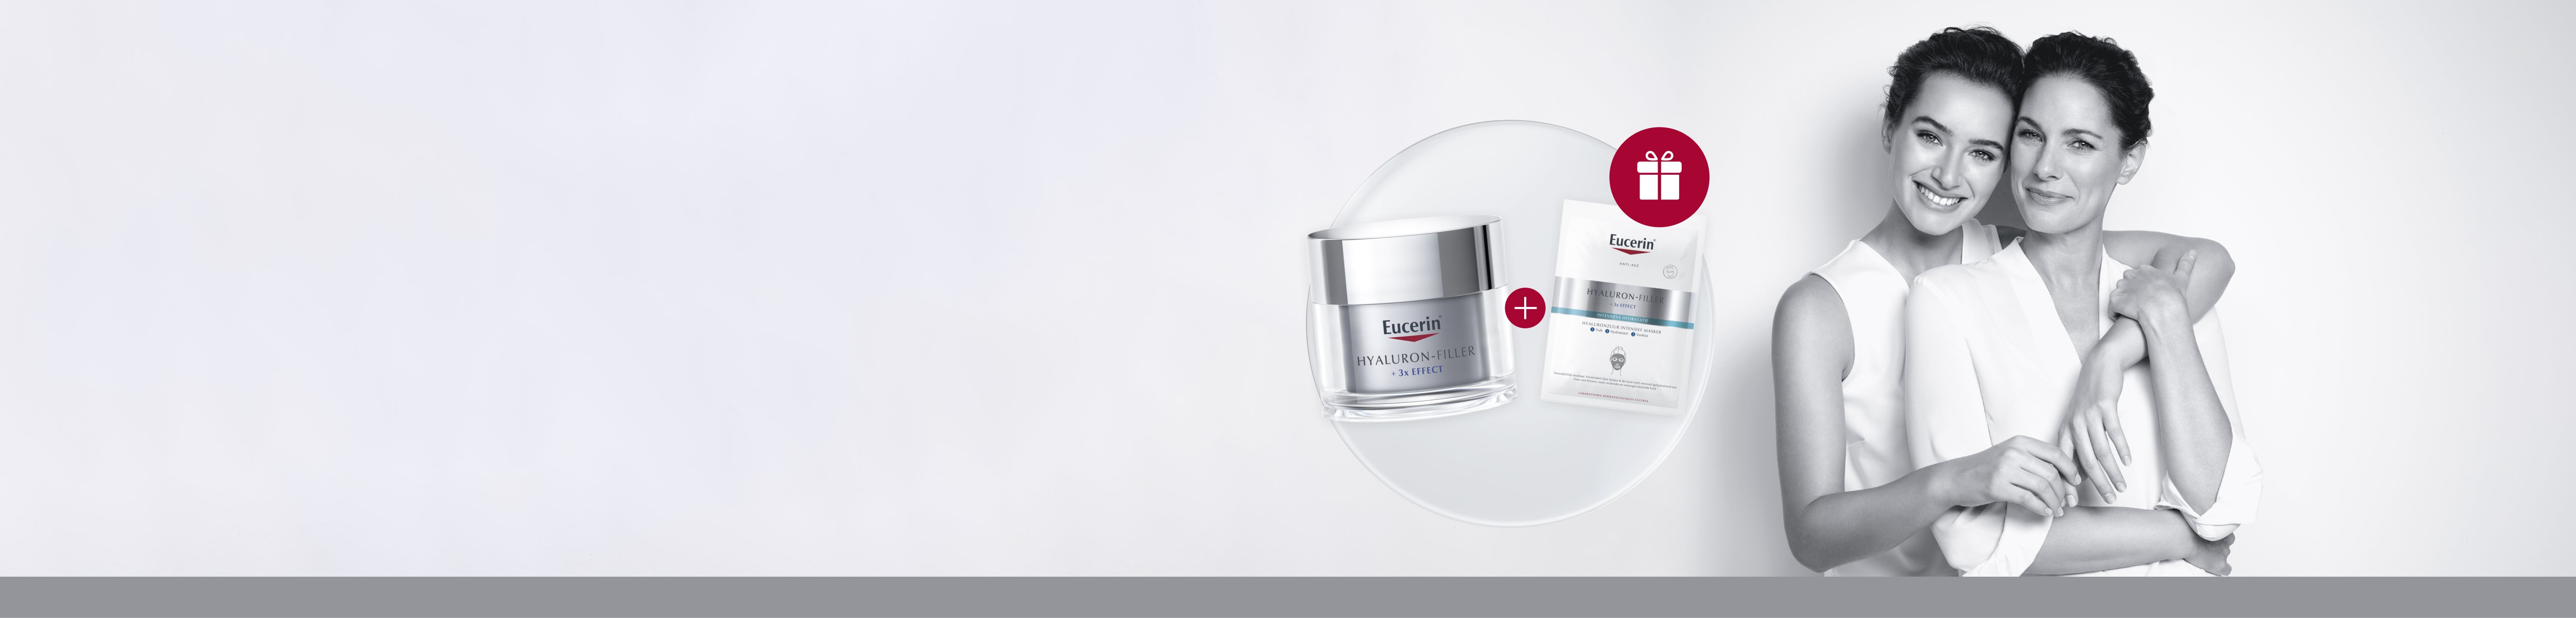 Medic rit Brutaal EUCERIN | Life-changing power of dermatological skincare